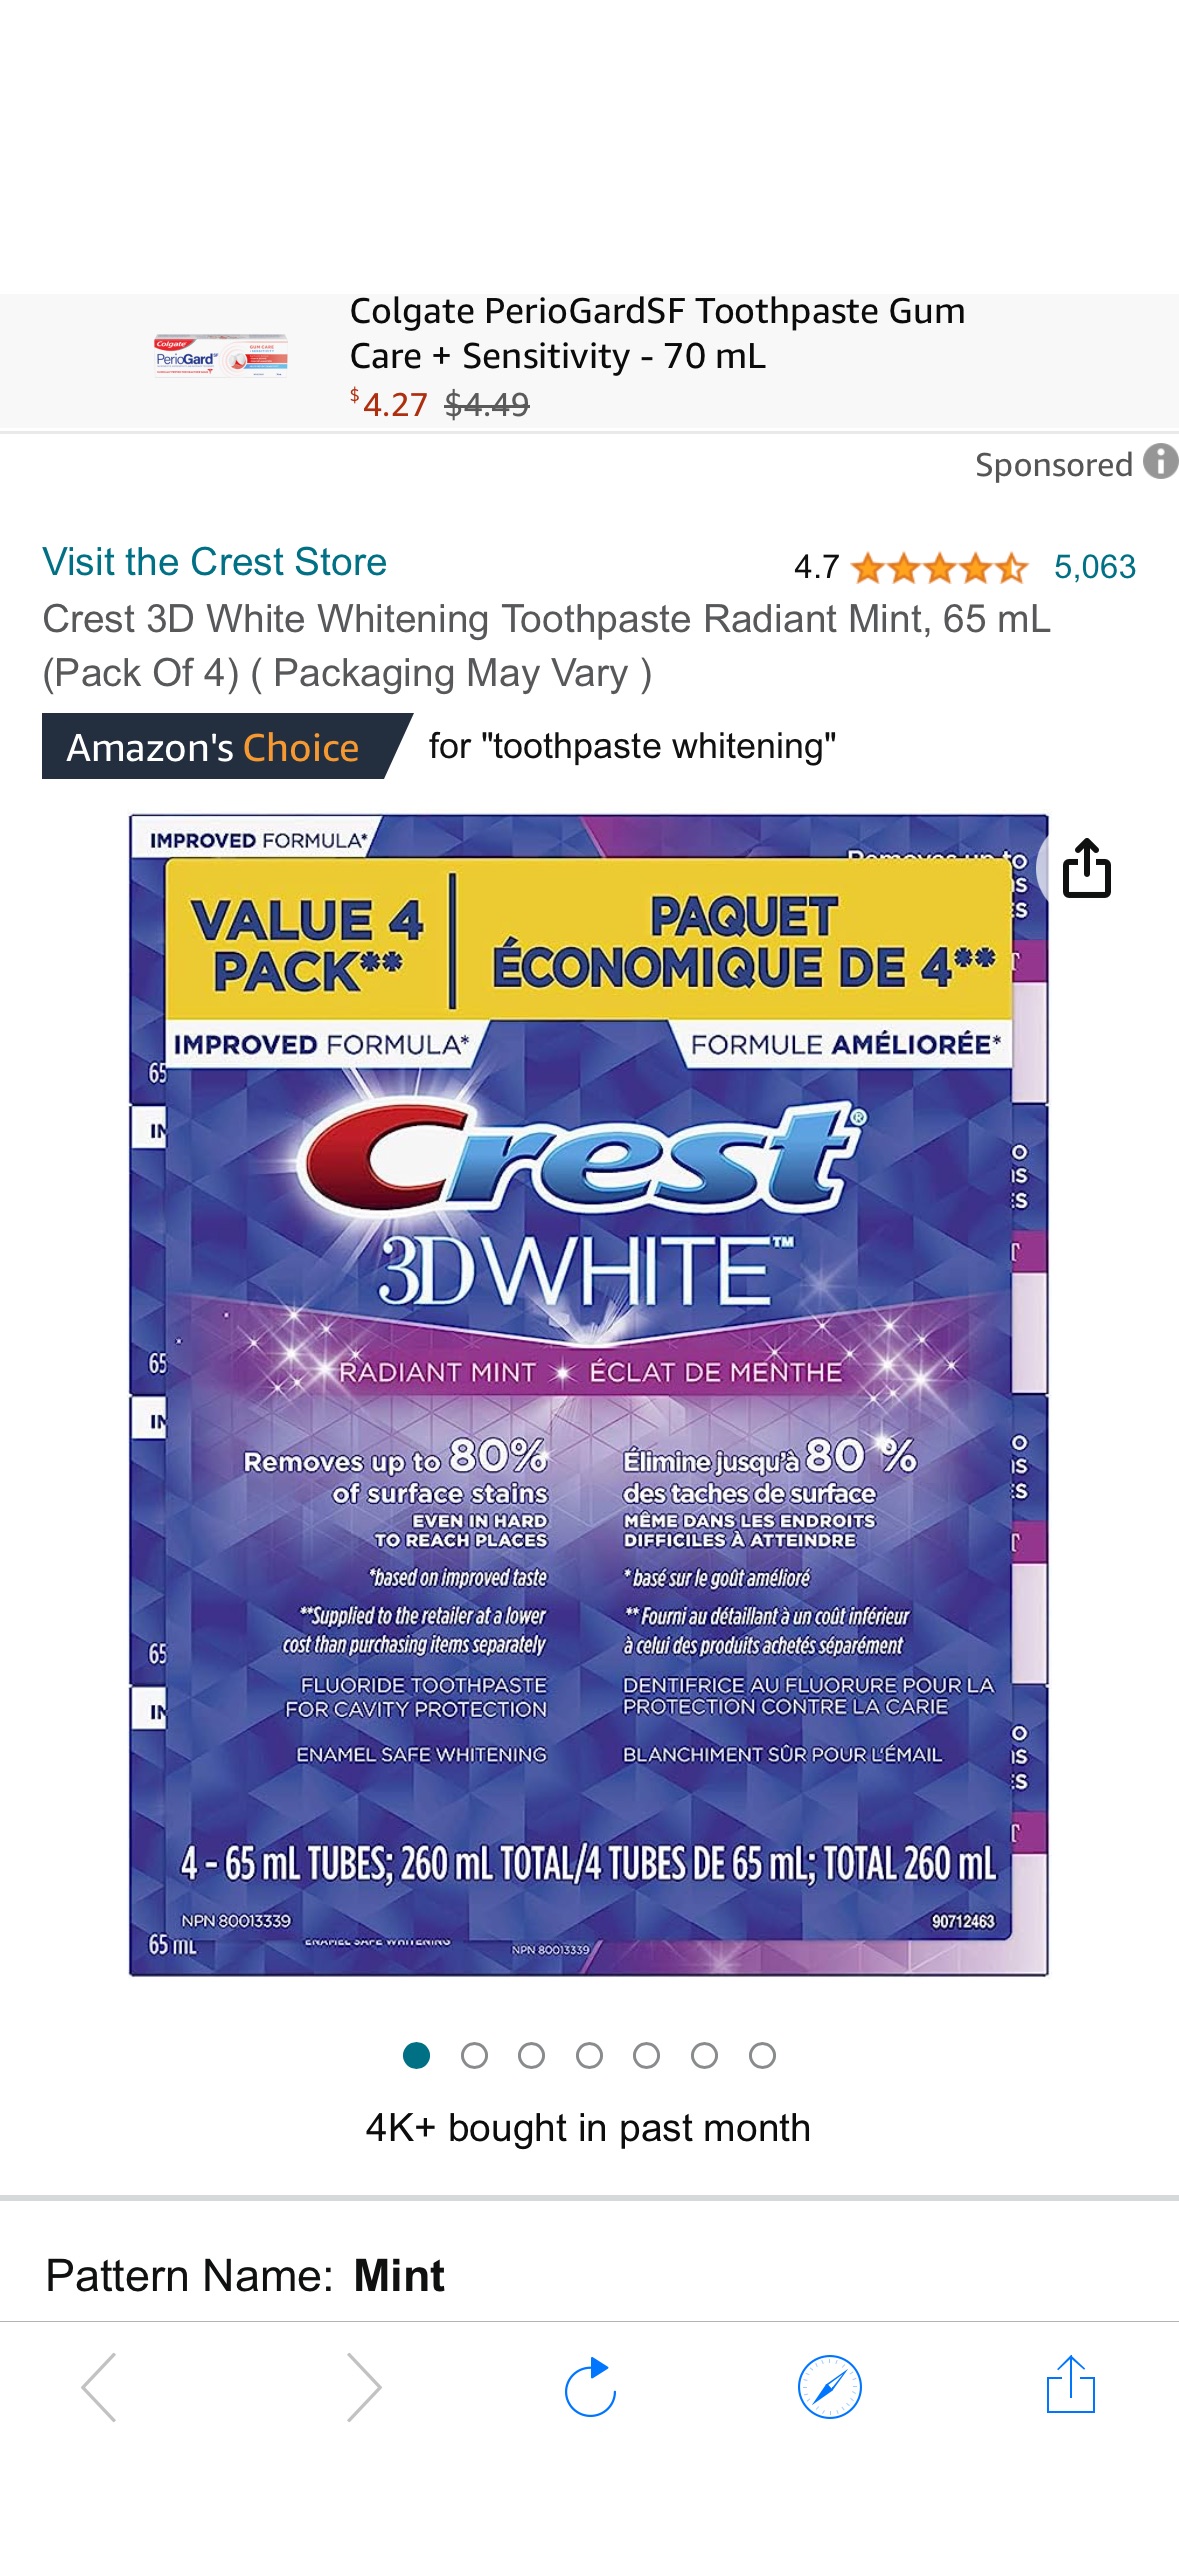 Crest 3D White Whitening Toothpaste Radiant Mint, 65 mL (Pack Of 4) ( Packaging May Vary ) : Amazon.ca: Health & Personal Care